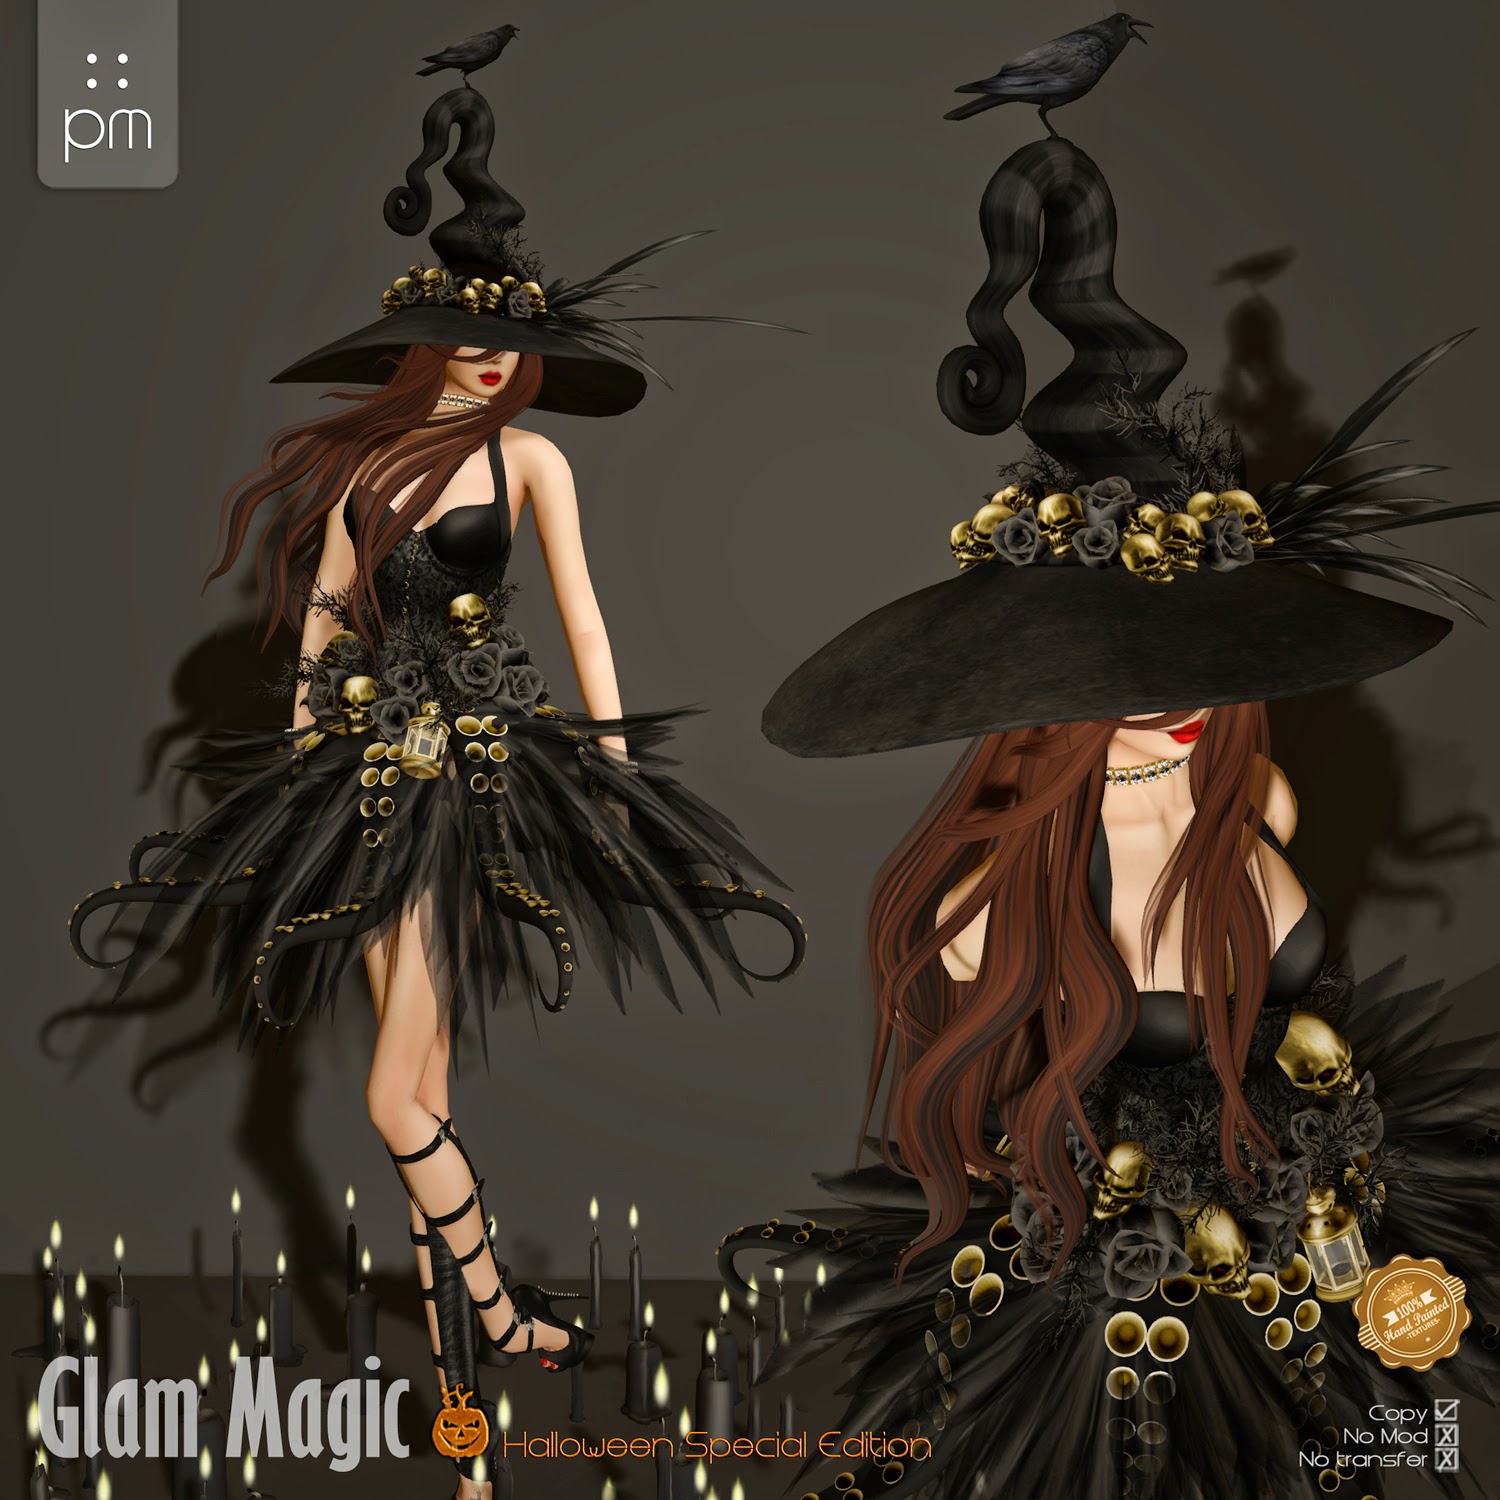 https://marketplace.secondlife.com/p/PM-Glam-Magic-Halloween-Special-Edition/6518830